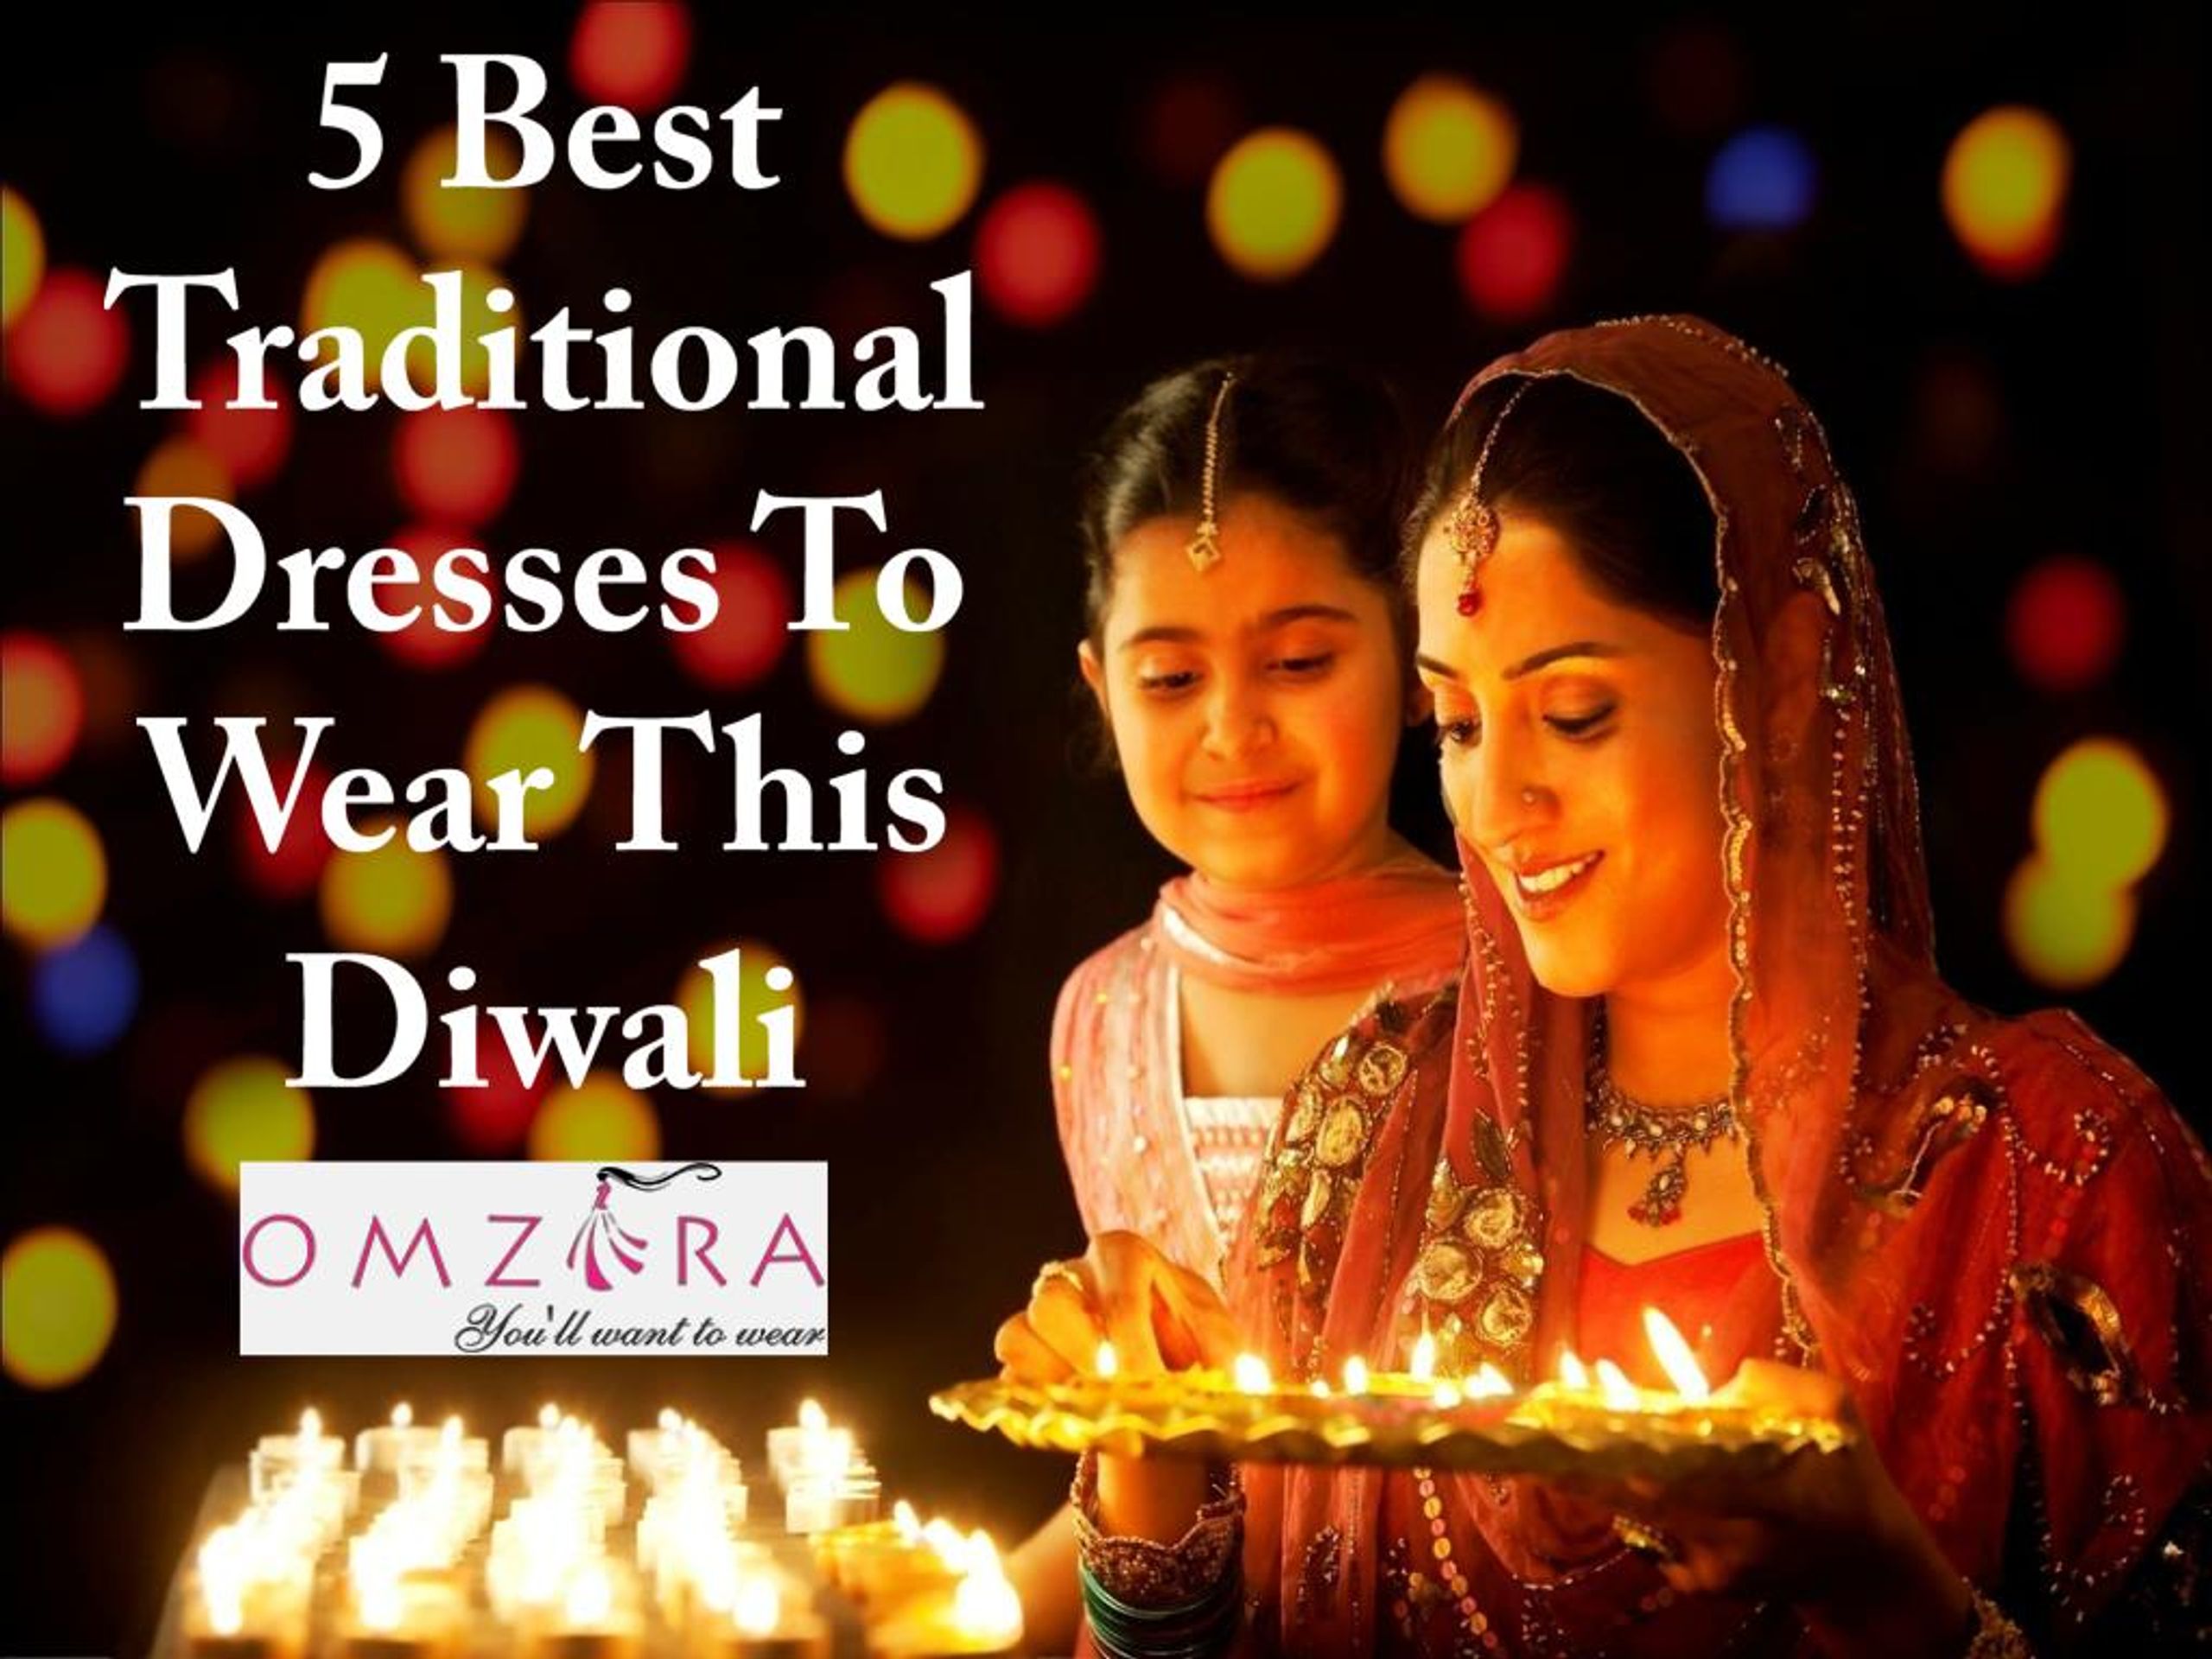 How To Choose The Best Outfits For Diwali | Femina.in